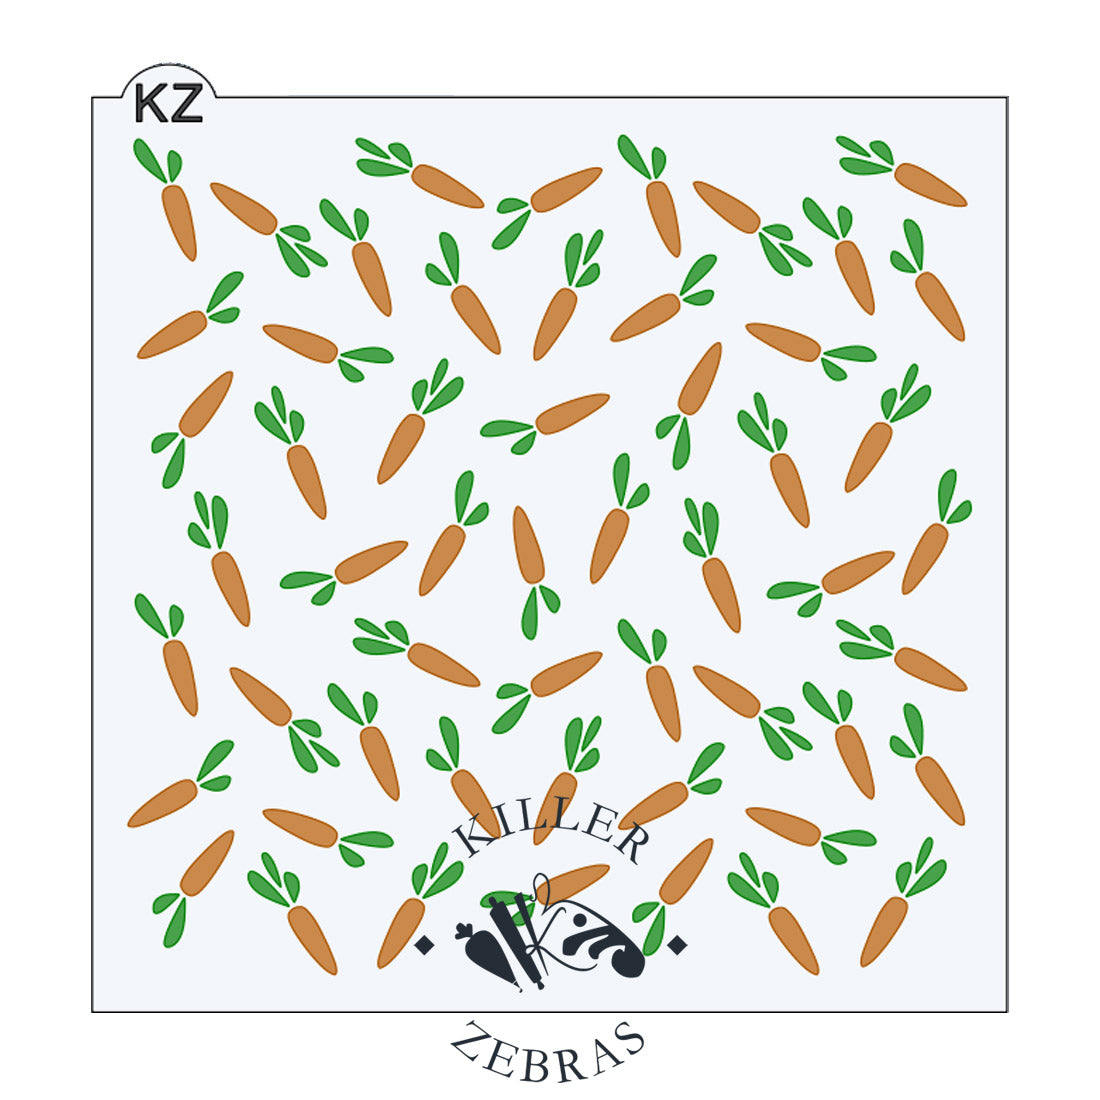 Large, square stencil with orange carrots and green leaves filling the page.